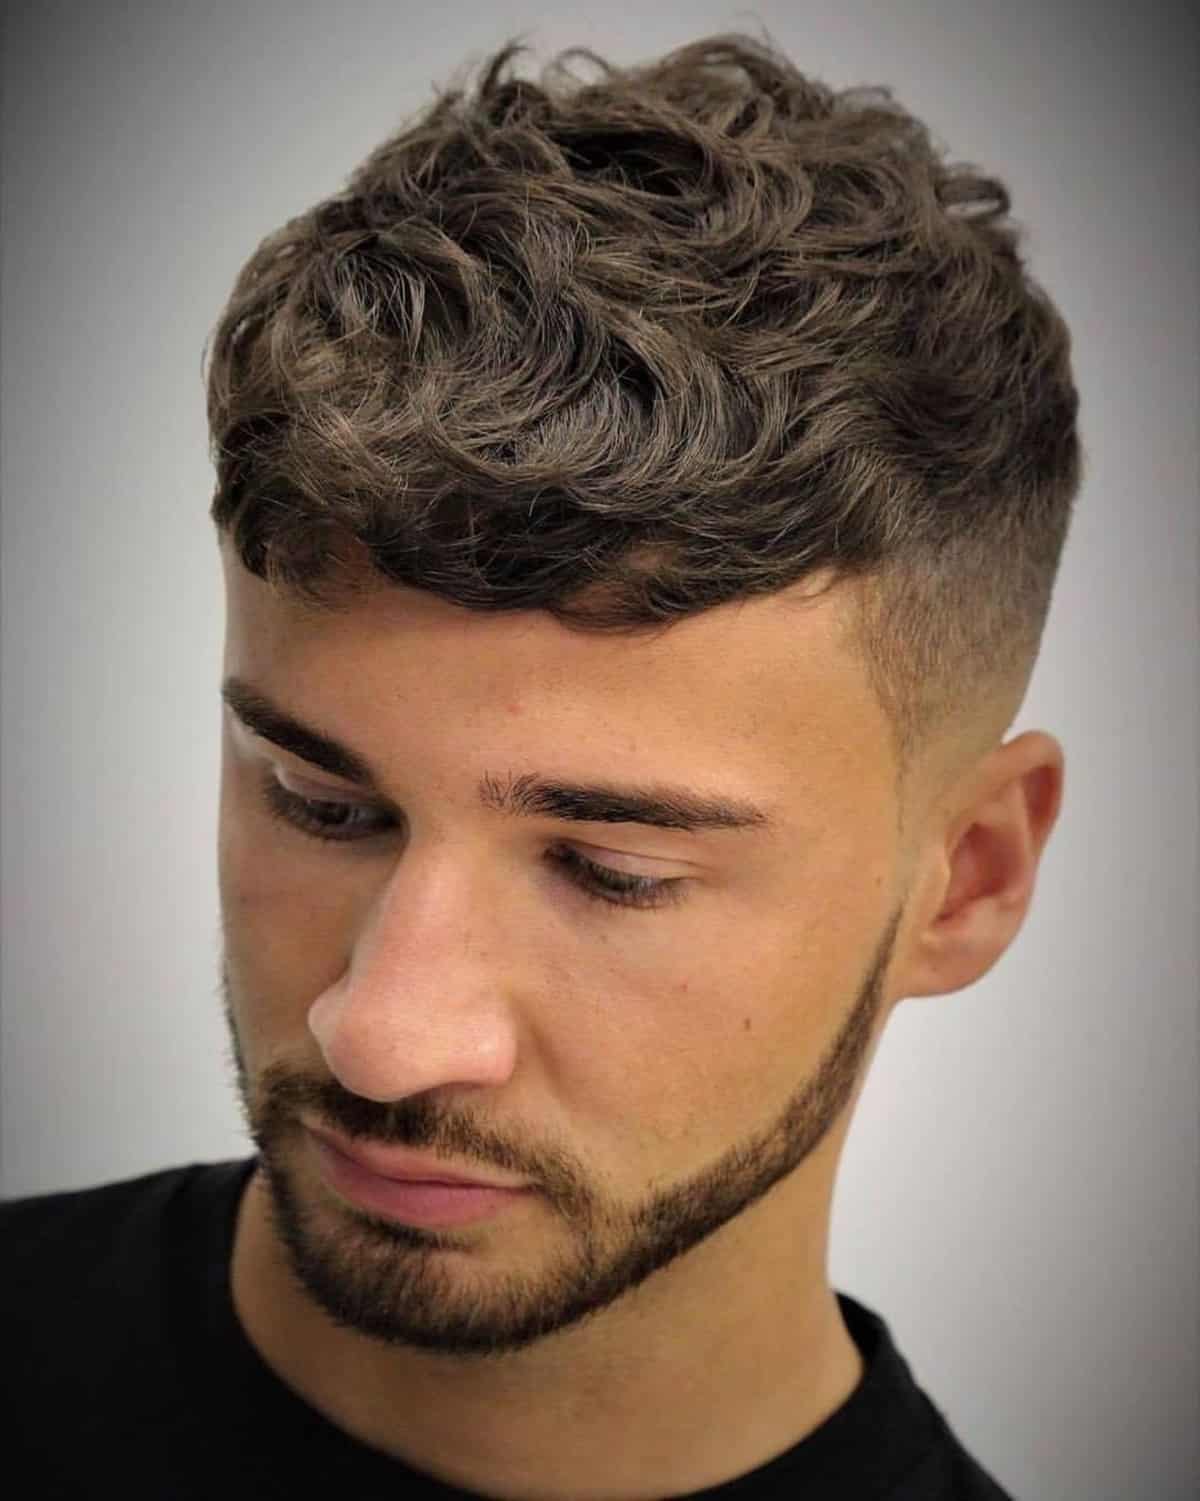 Mens undercut with thick waves